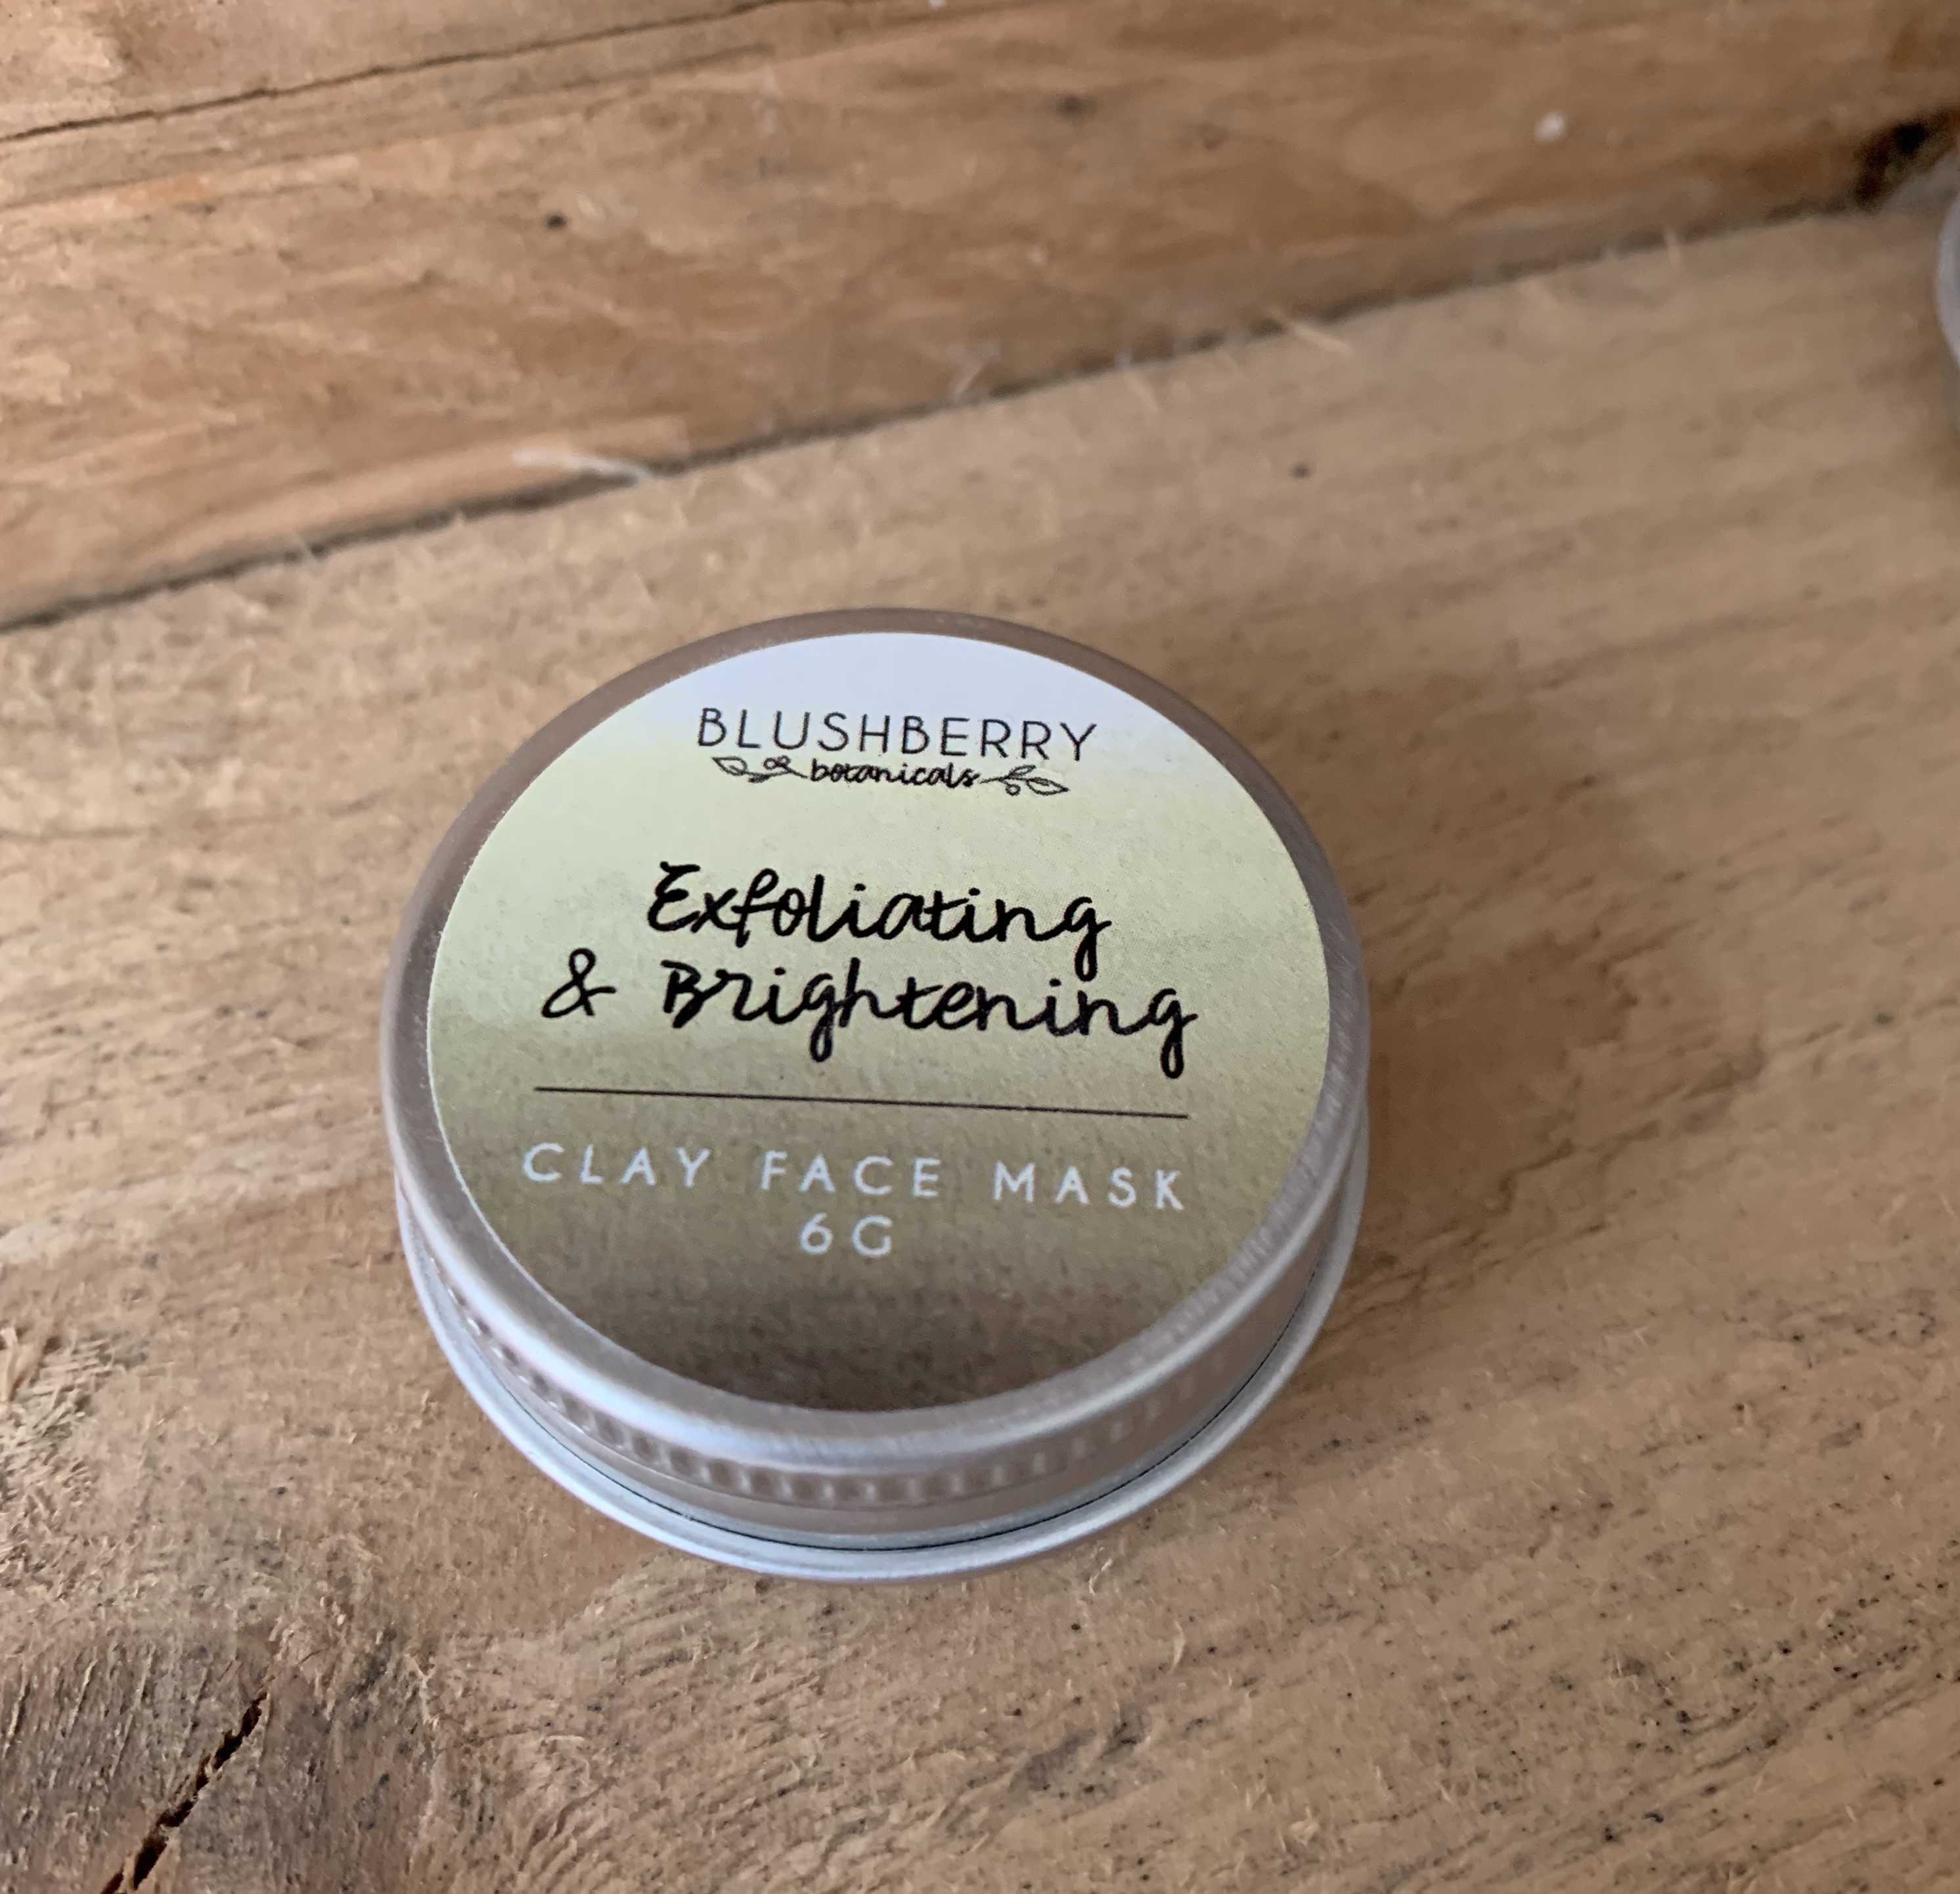 Exfoliating and Brightening Blushberry Botanicals Clay Face Mask